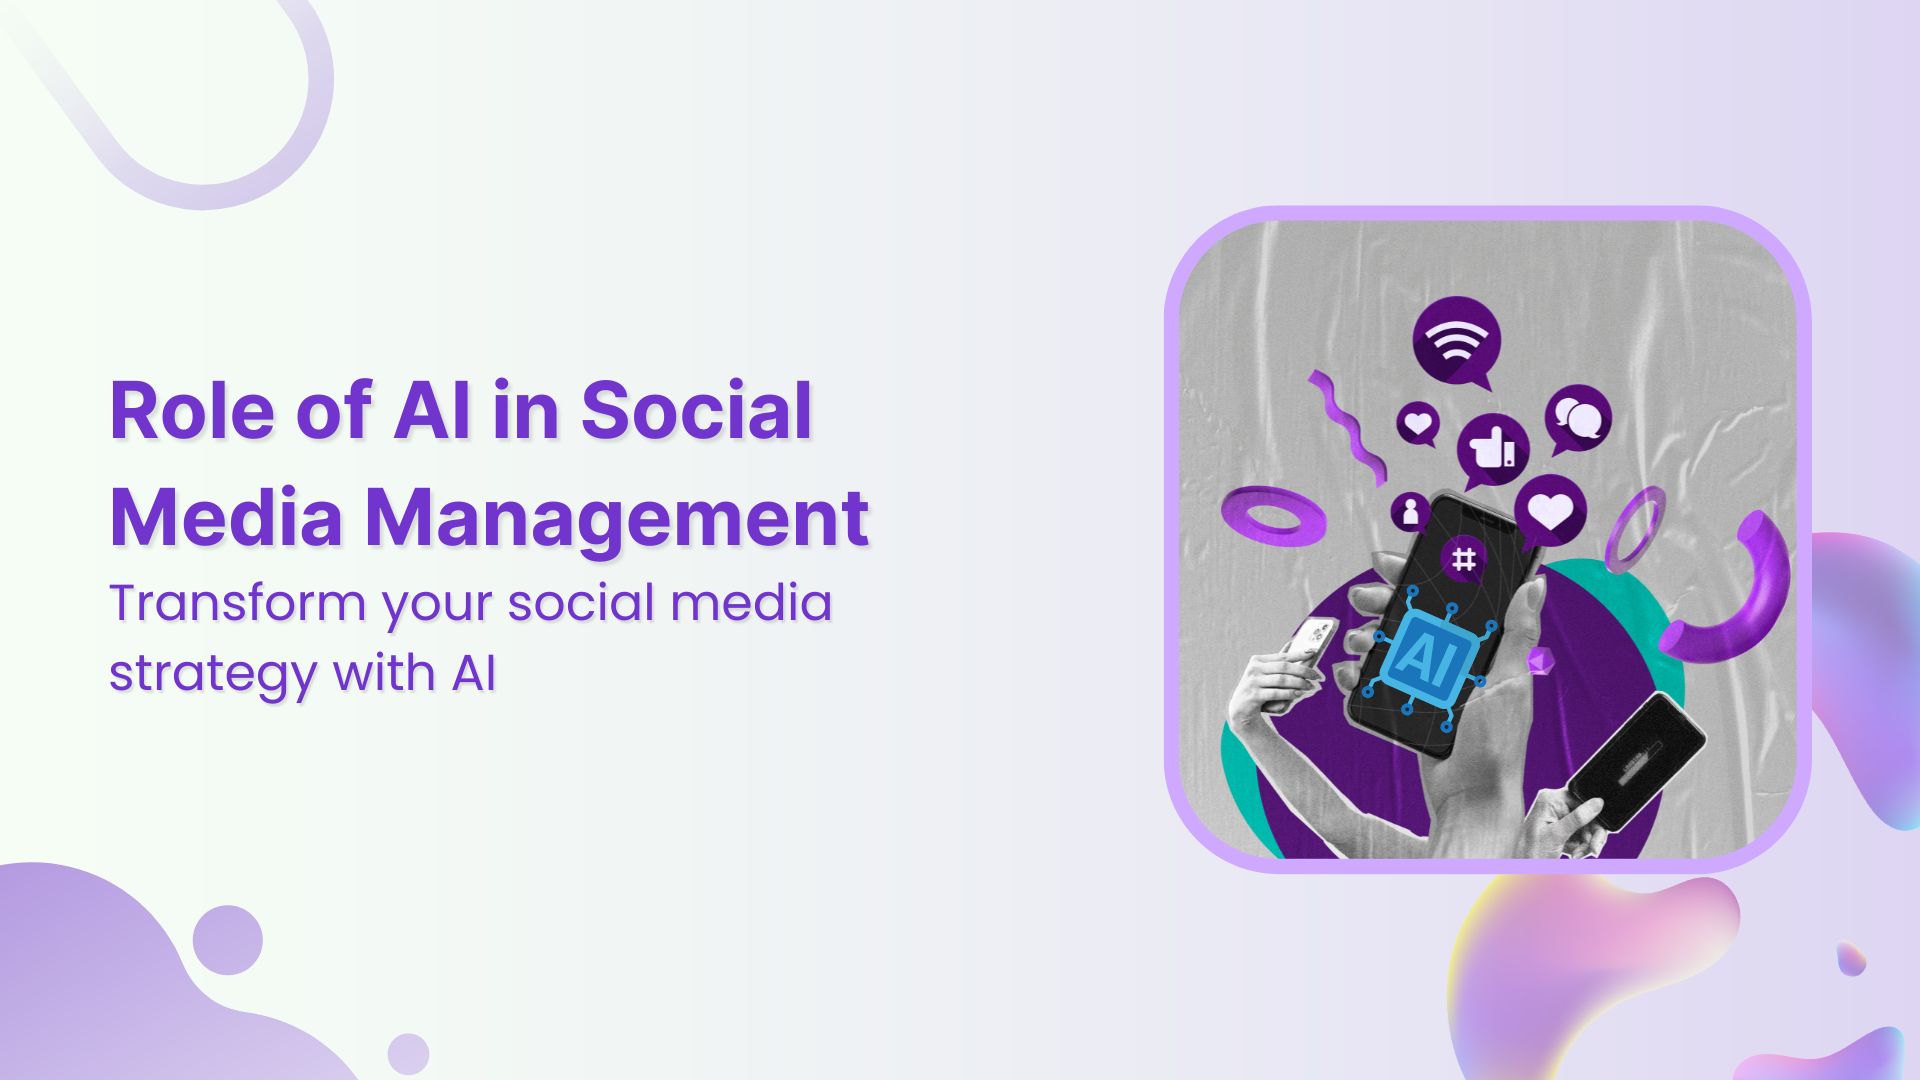 Role of AI in social media management